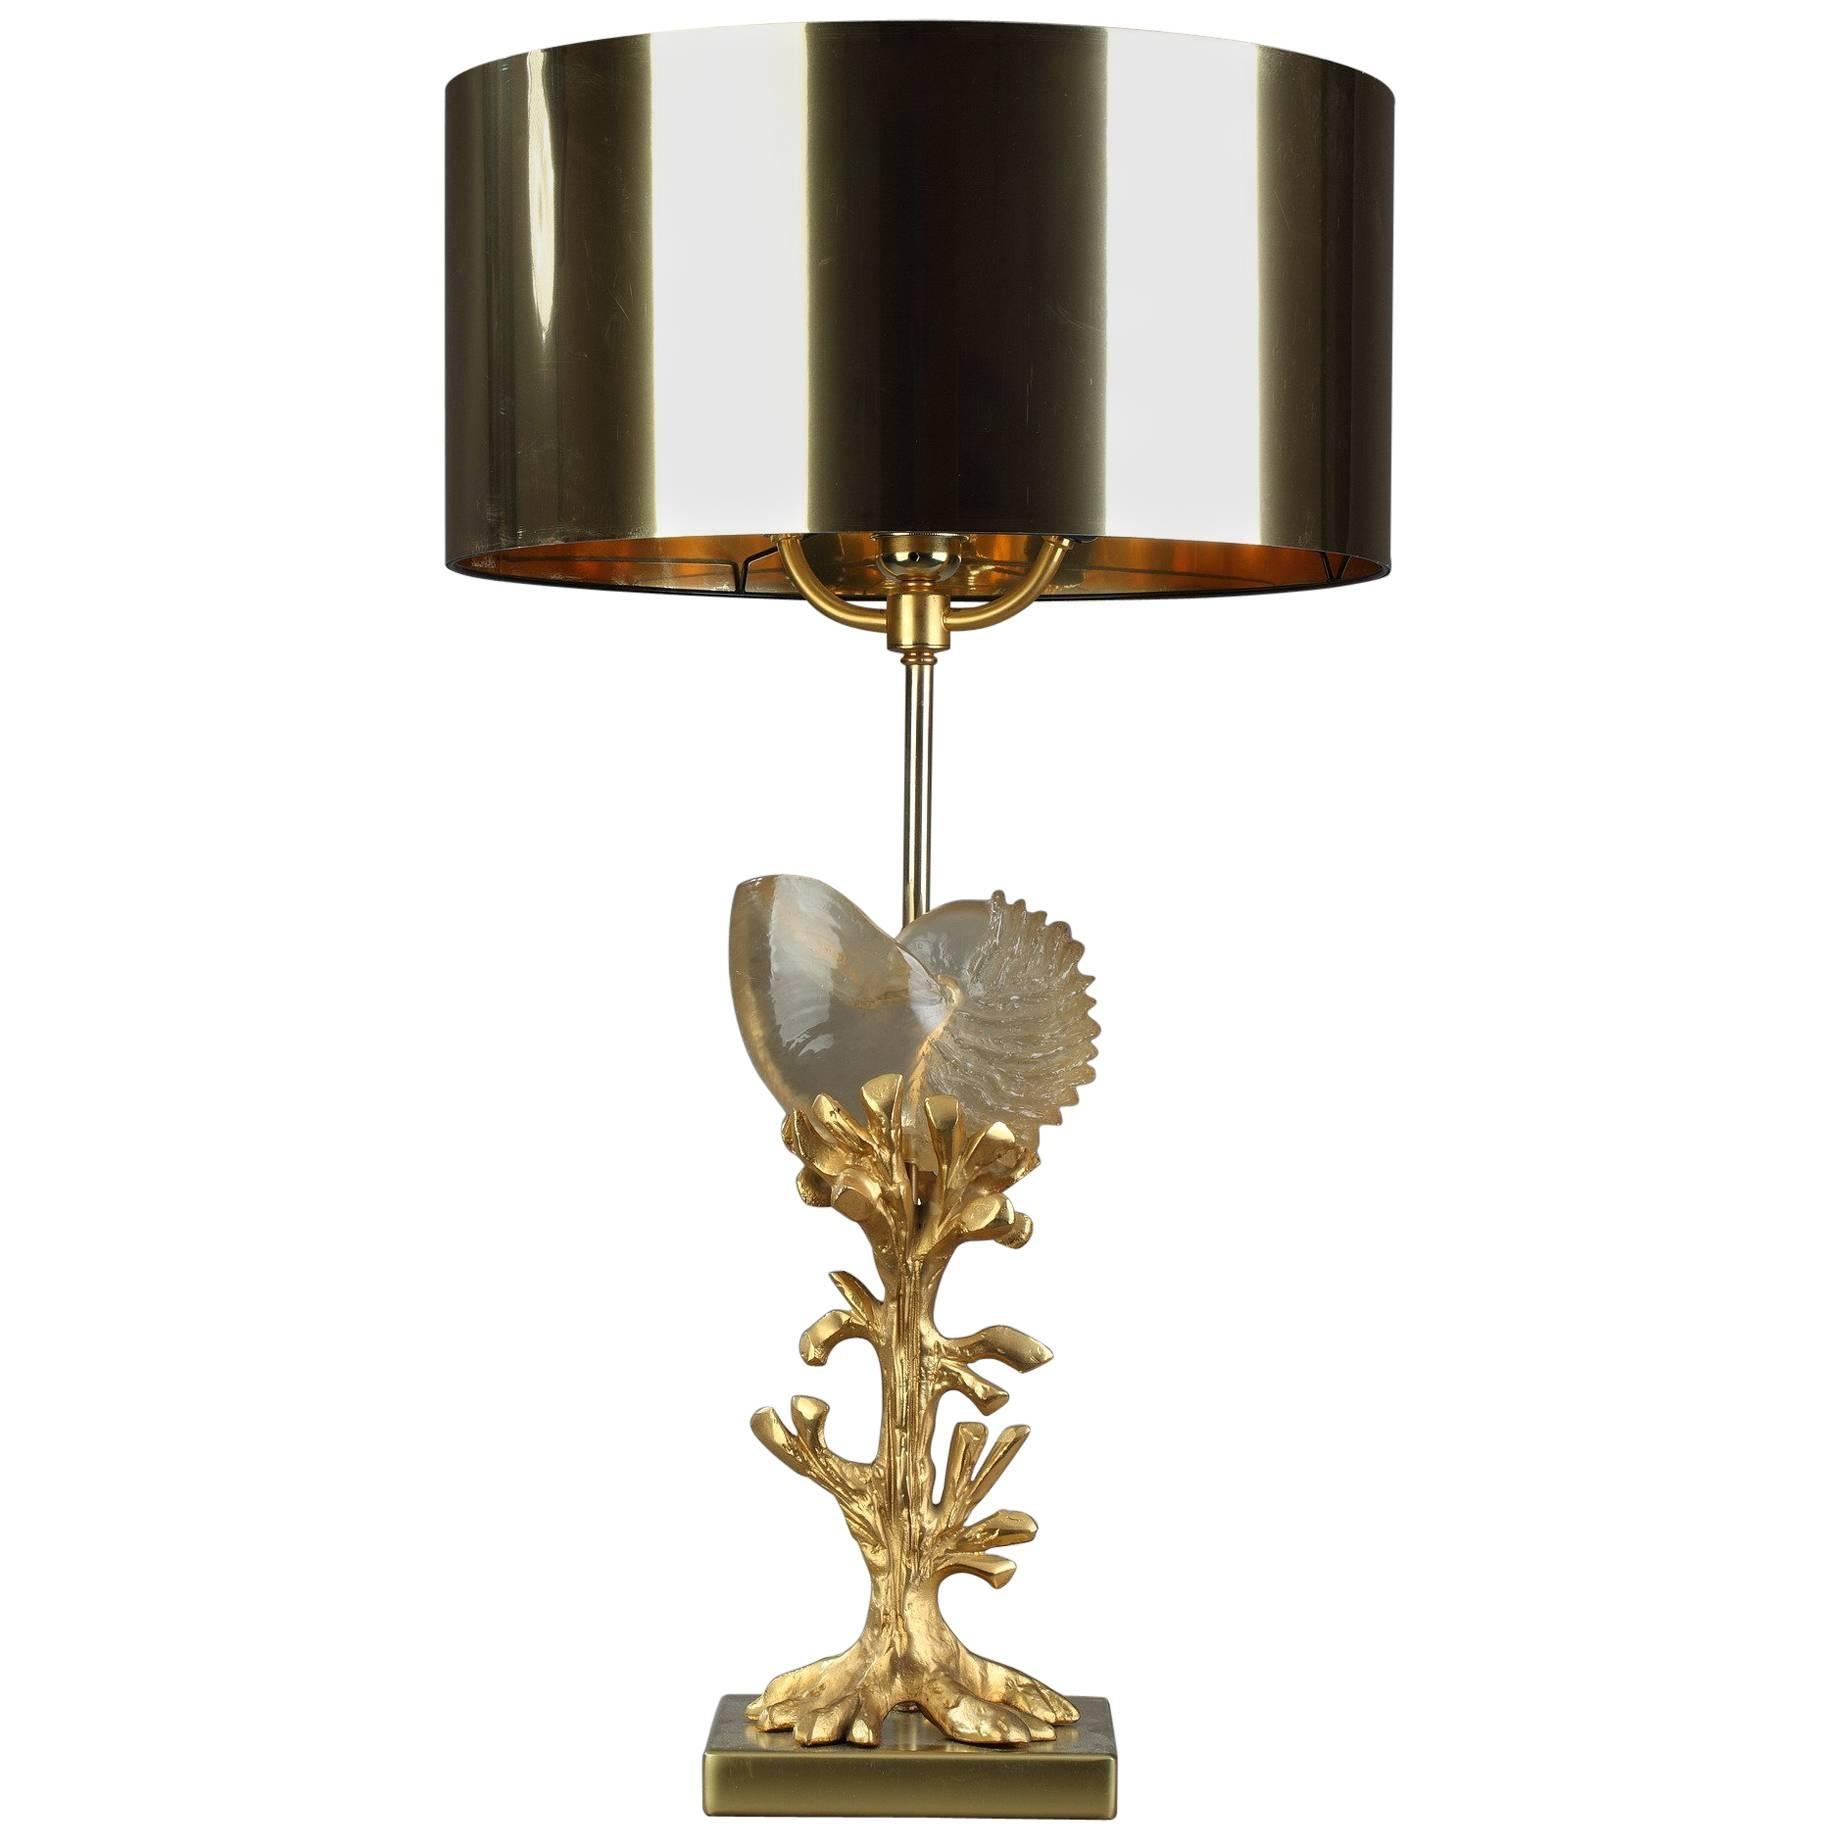 20th Century Gilded Metal Lamp in Charles House Style